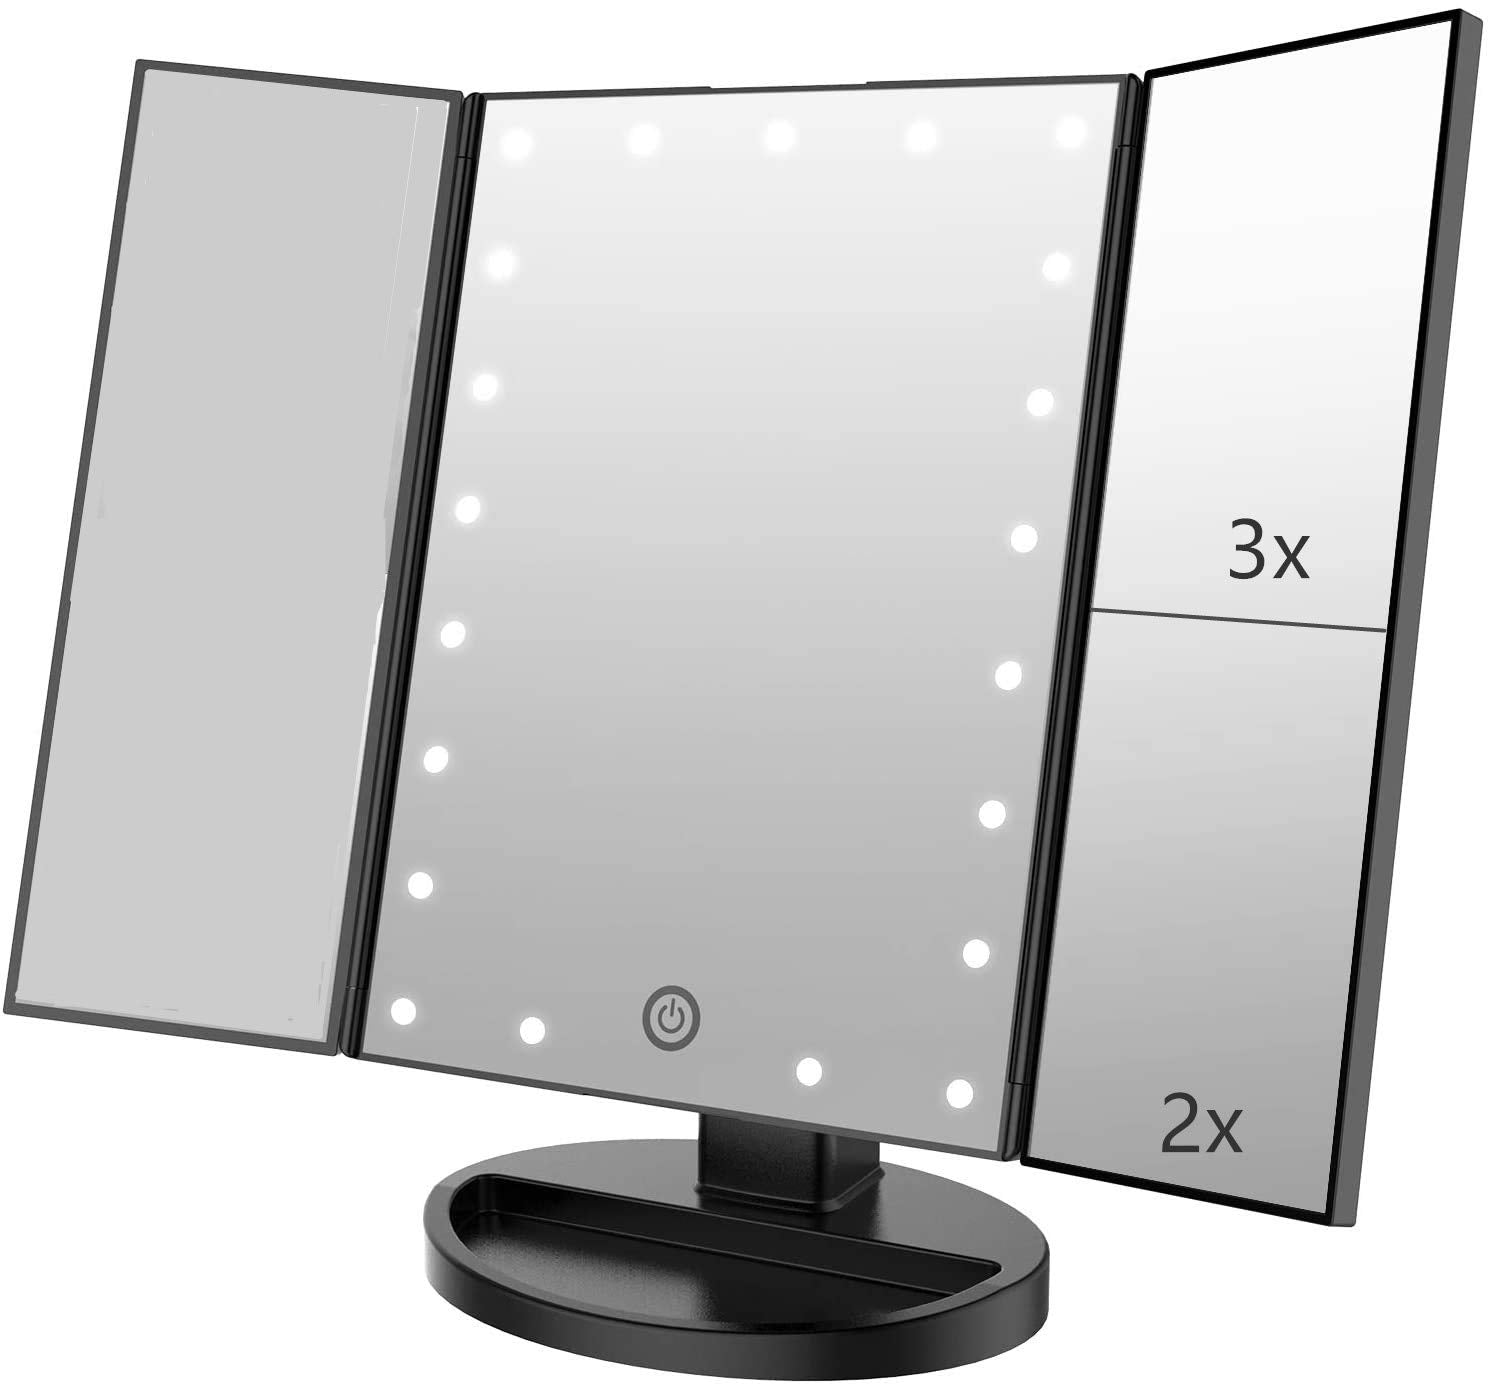 Flymiro Tri-fold Lighted Vanity Makeup Mirror with 3x/2x/1x Magnification, 21Leds Light and Touch Screen,180 Degree Free Rotation Countertop Travel Cosmetic Mirror (Black)